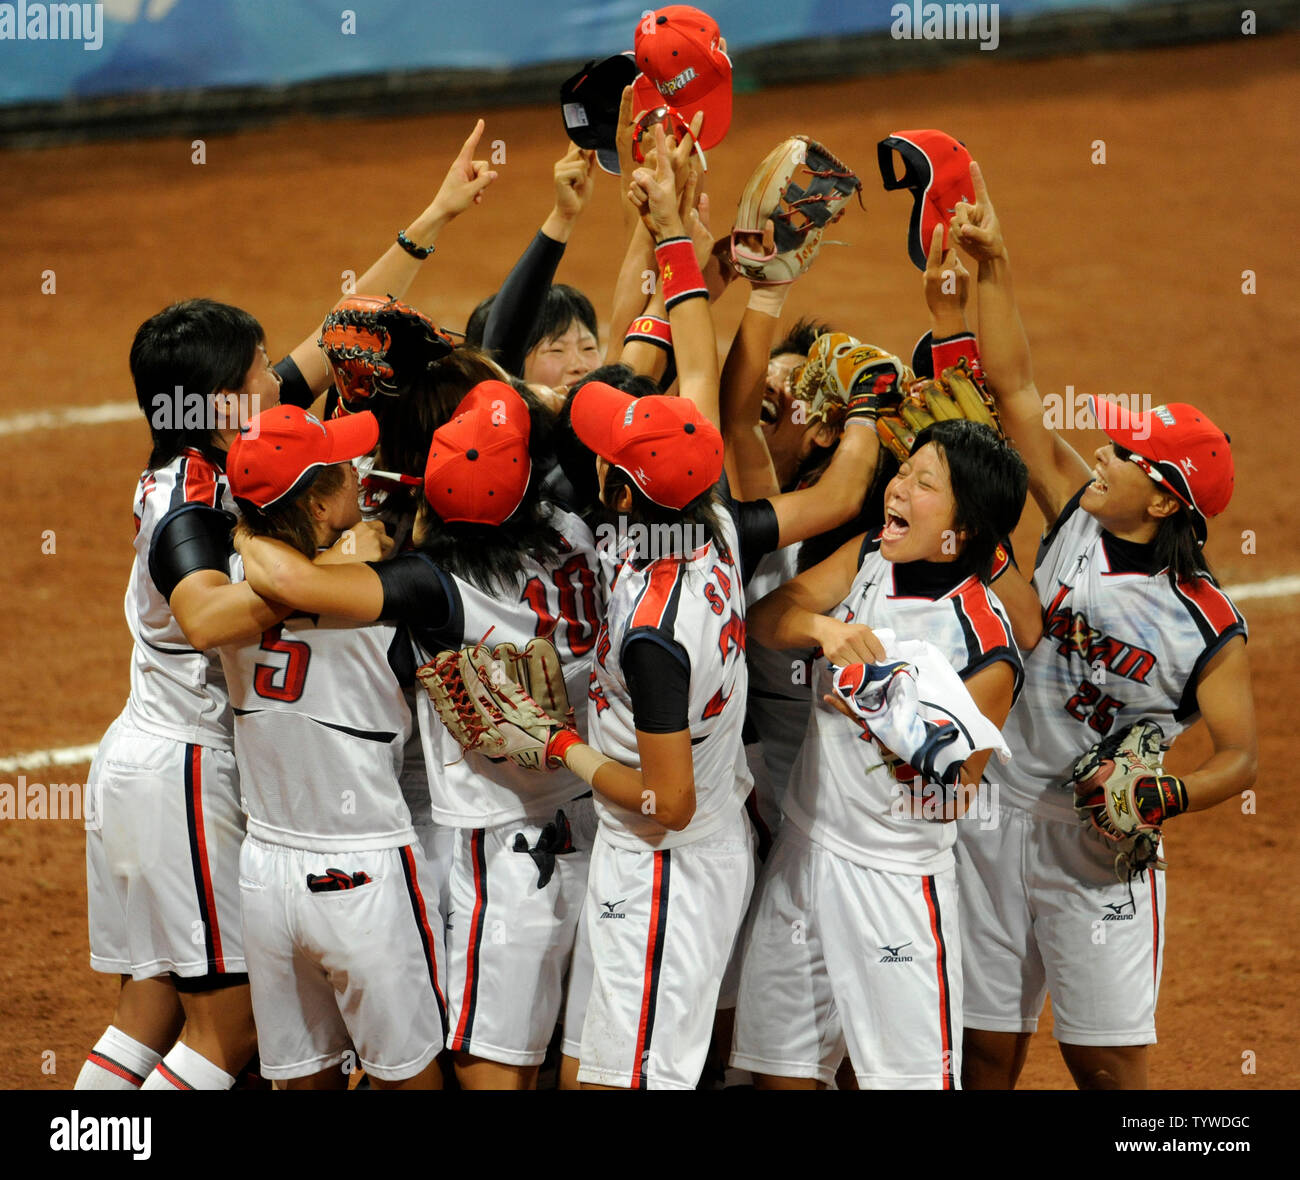 Japanese women's softball team celebrate the last out, as Japan wins the gold medal against the USA women's team, 3-1, at Fengtai Softball Field,  August 21, 2008, at the Summer Olympics in Beijing. The USA team had beaten Japan in an earlier match.  Australia won the bronze.      (UPI Photo/Mike Theiler) Stock Photo